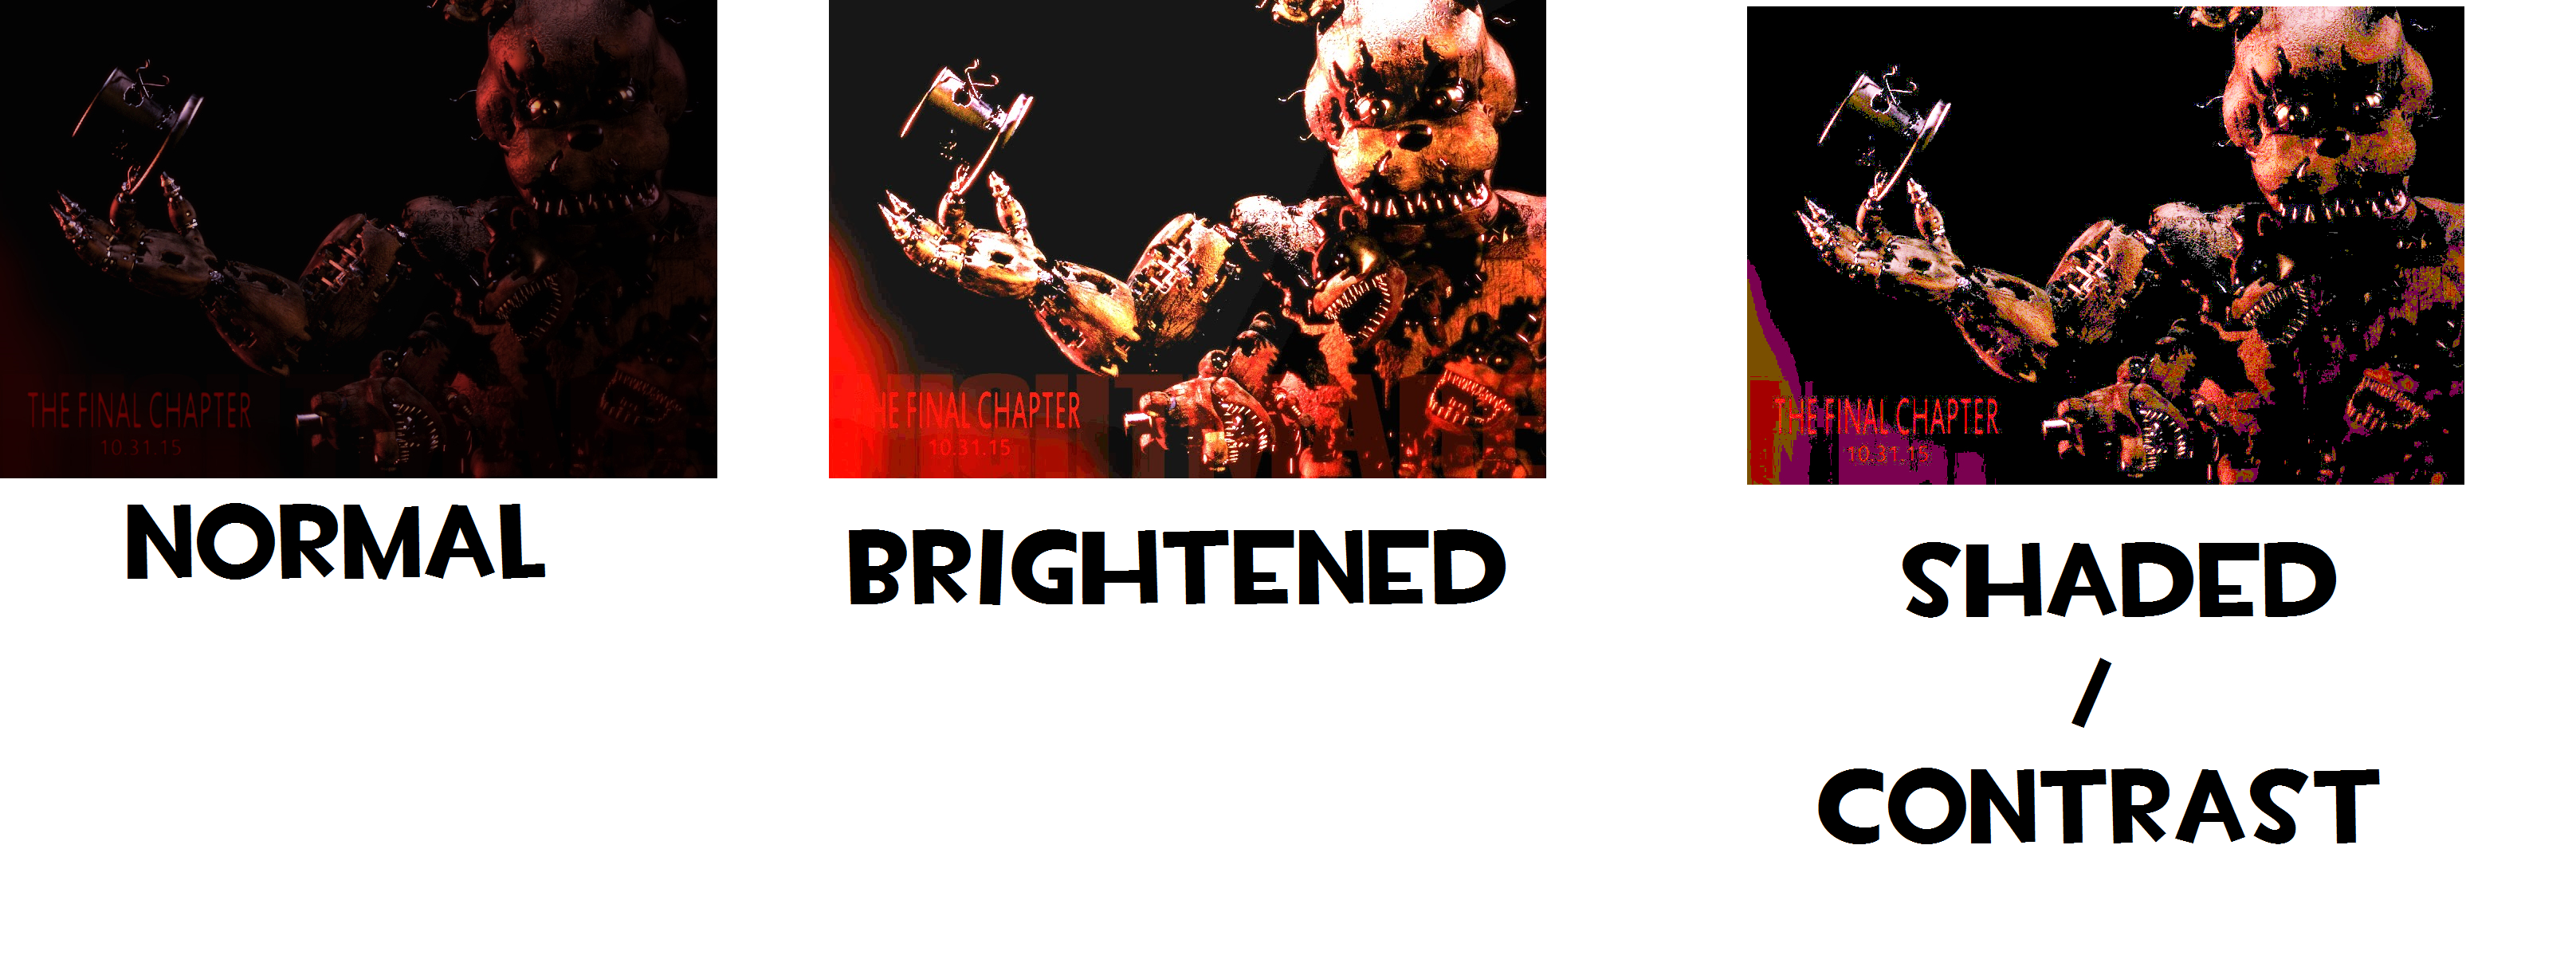 Five Nights At Freddy S Has Been Confirmed By Thelakotanoid1 On